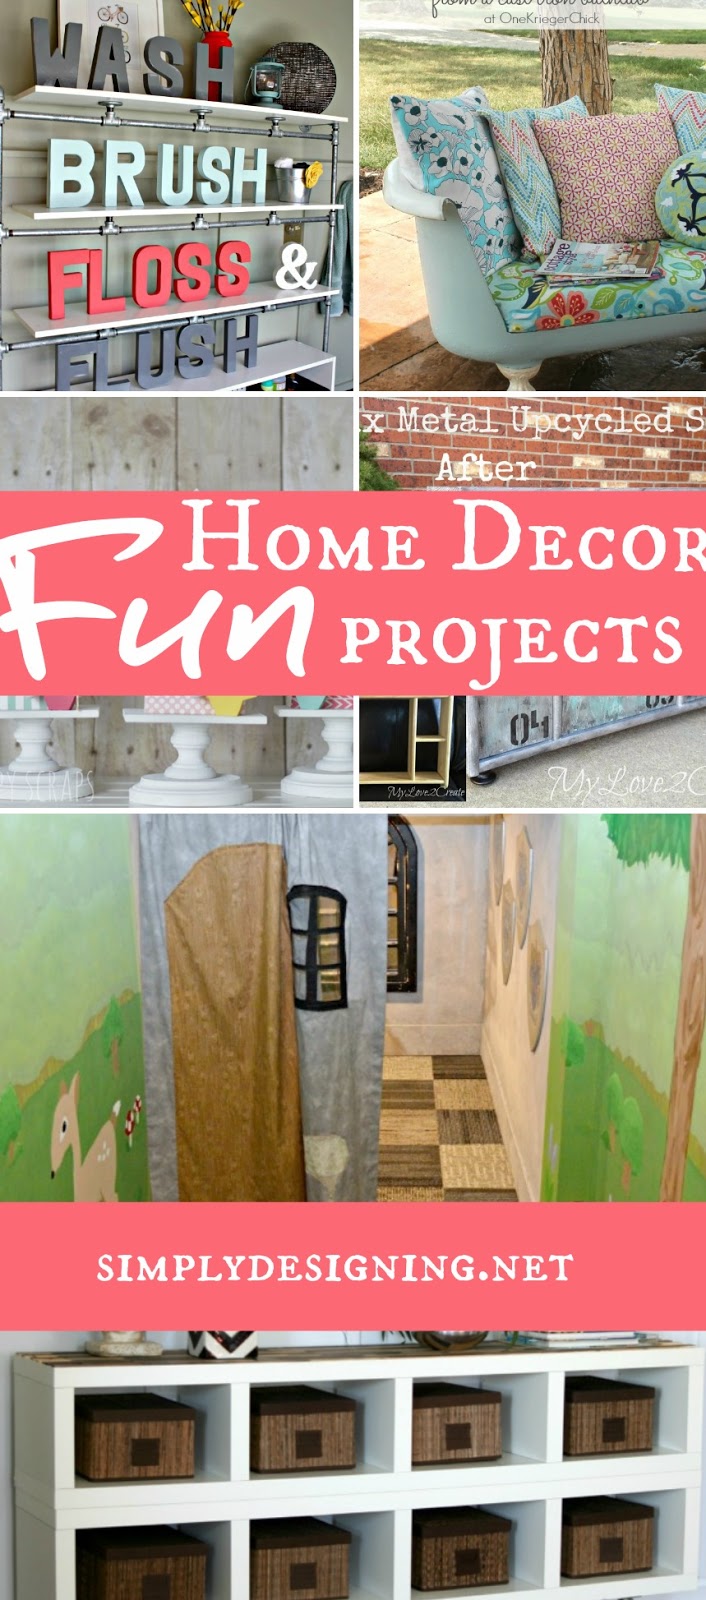 Fun Home Decor Projects | #homedecor #diy #crafts #home